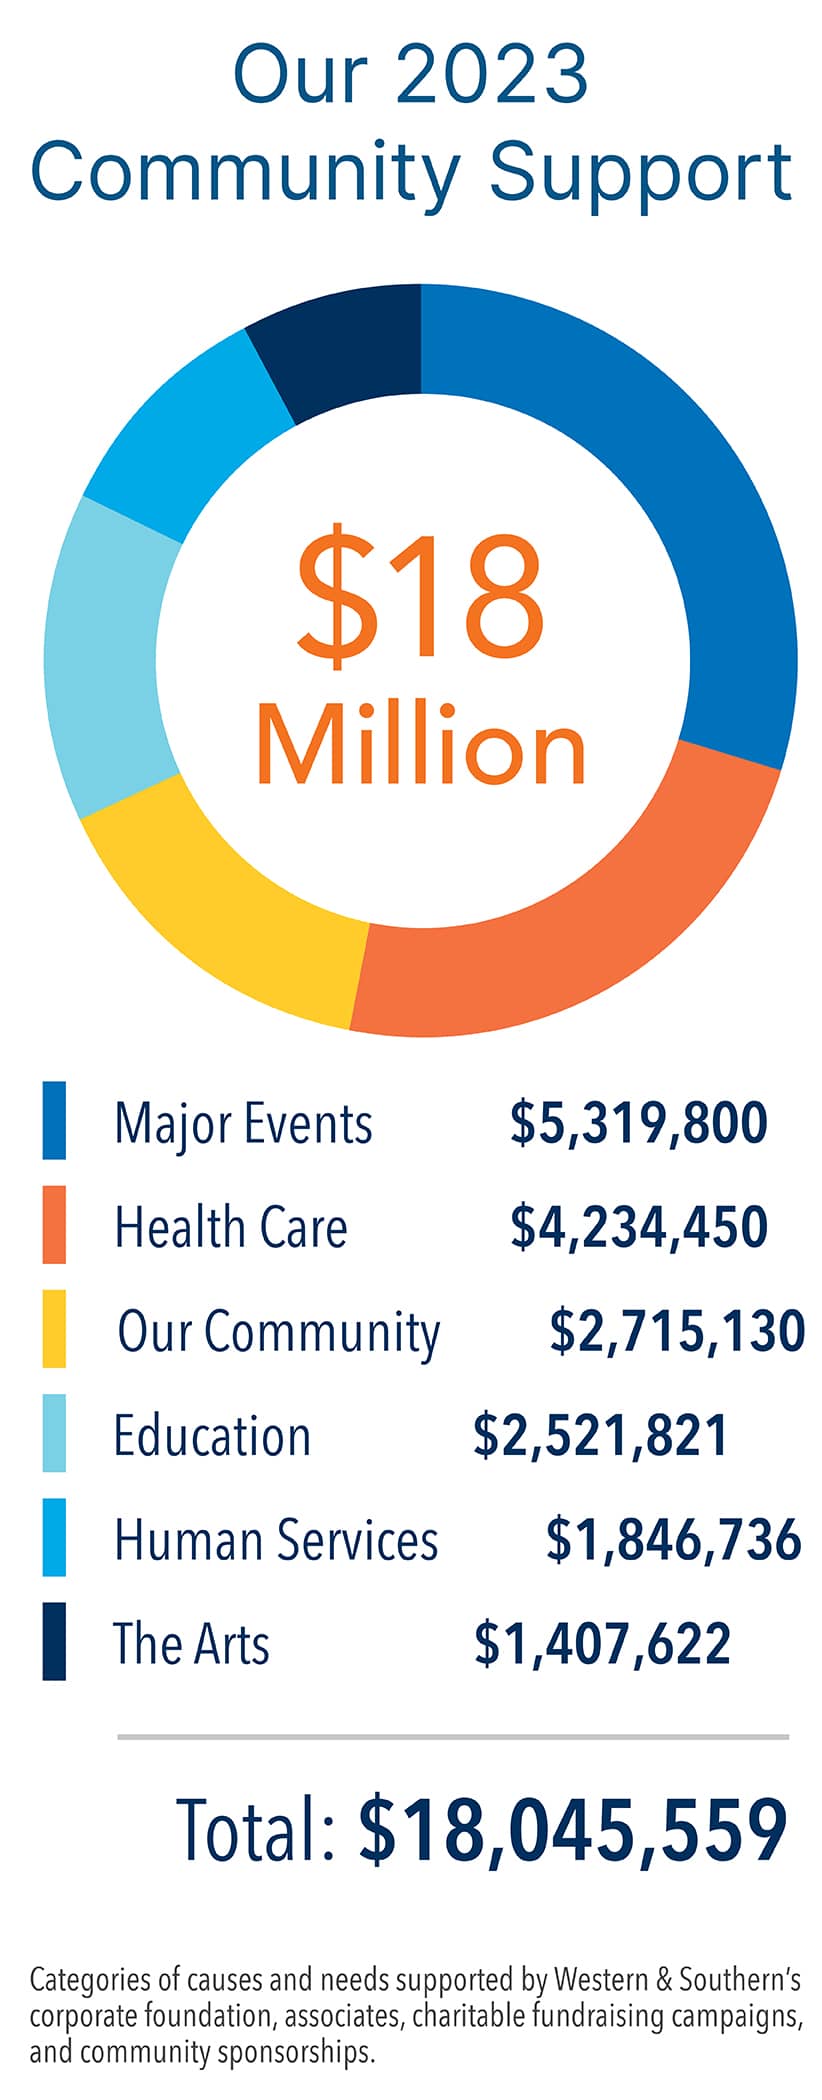 Overview of the 18 million dollars in financial support Western & Southern has provided across various community services.